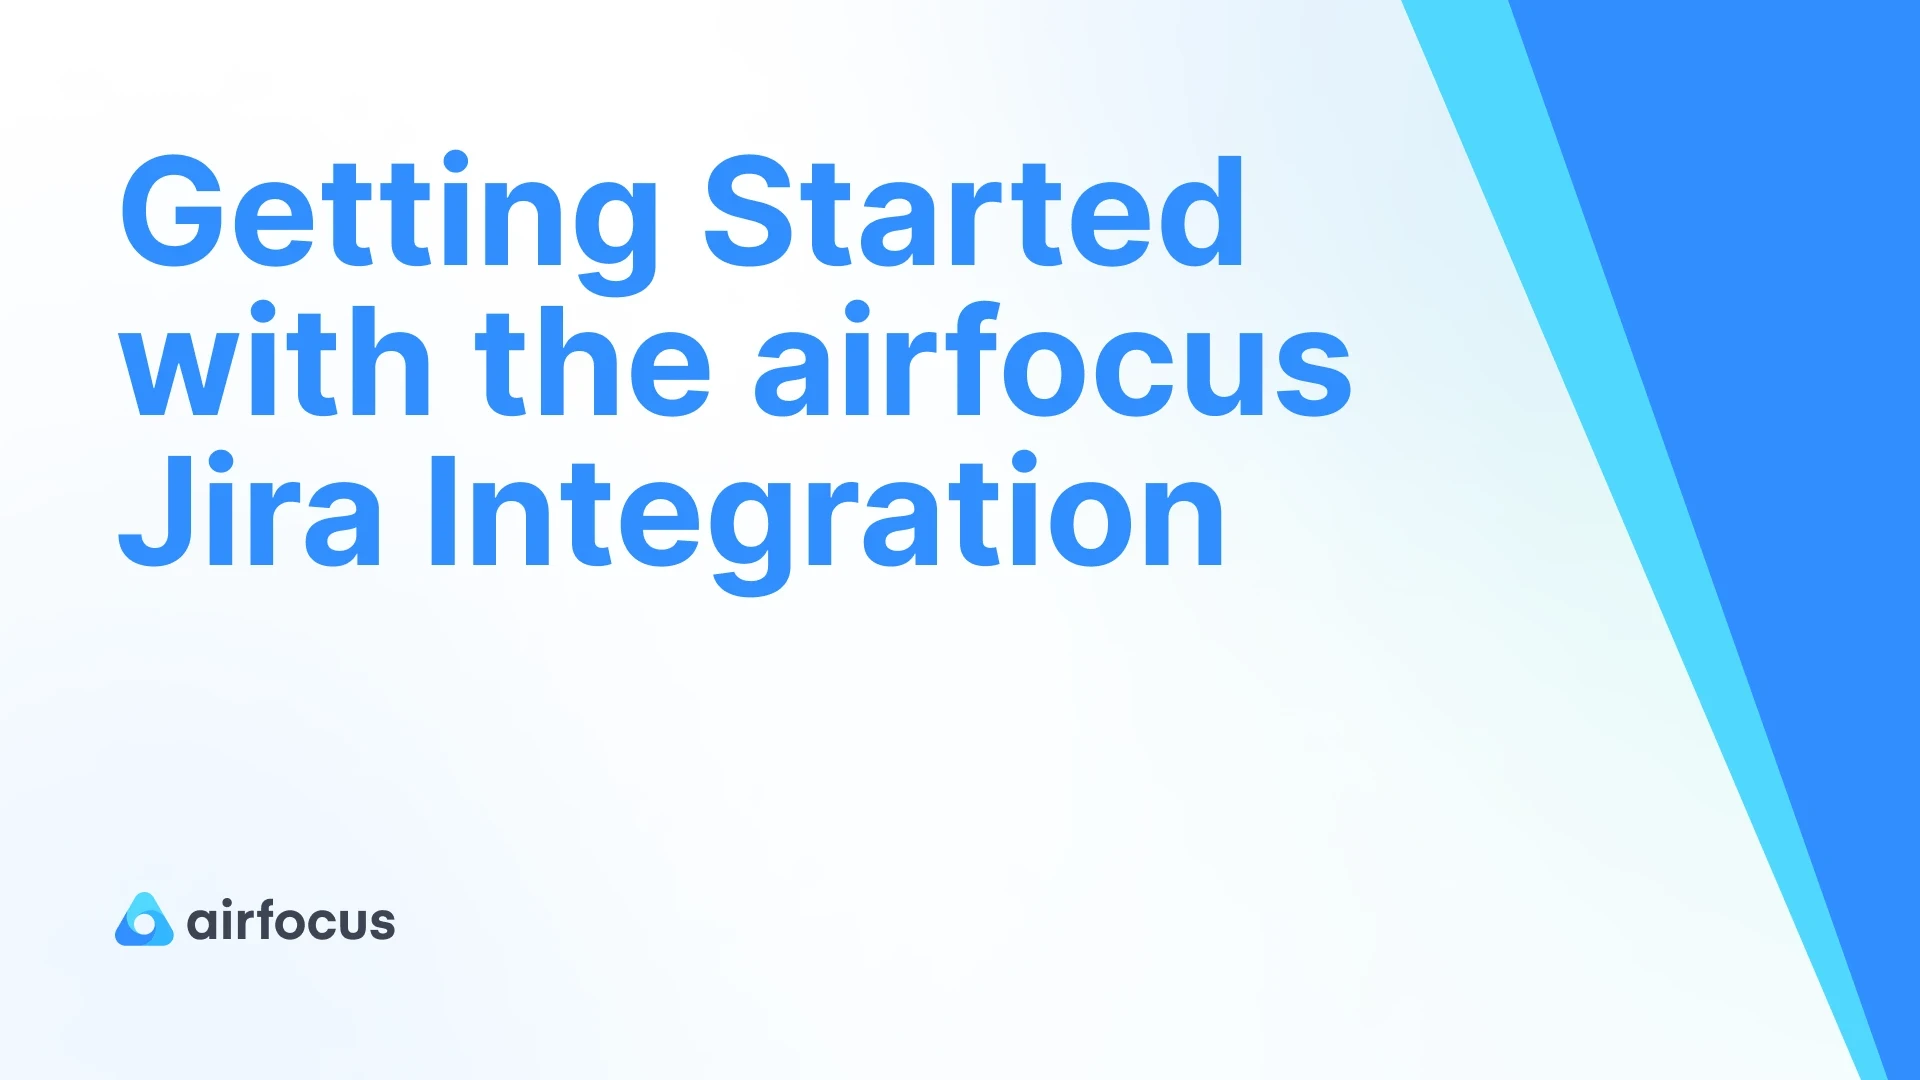 Getting Started with the Jira Integration for airfocus